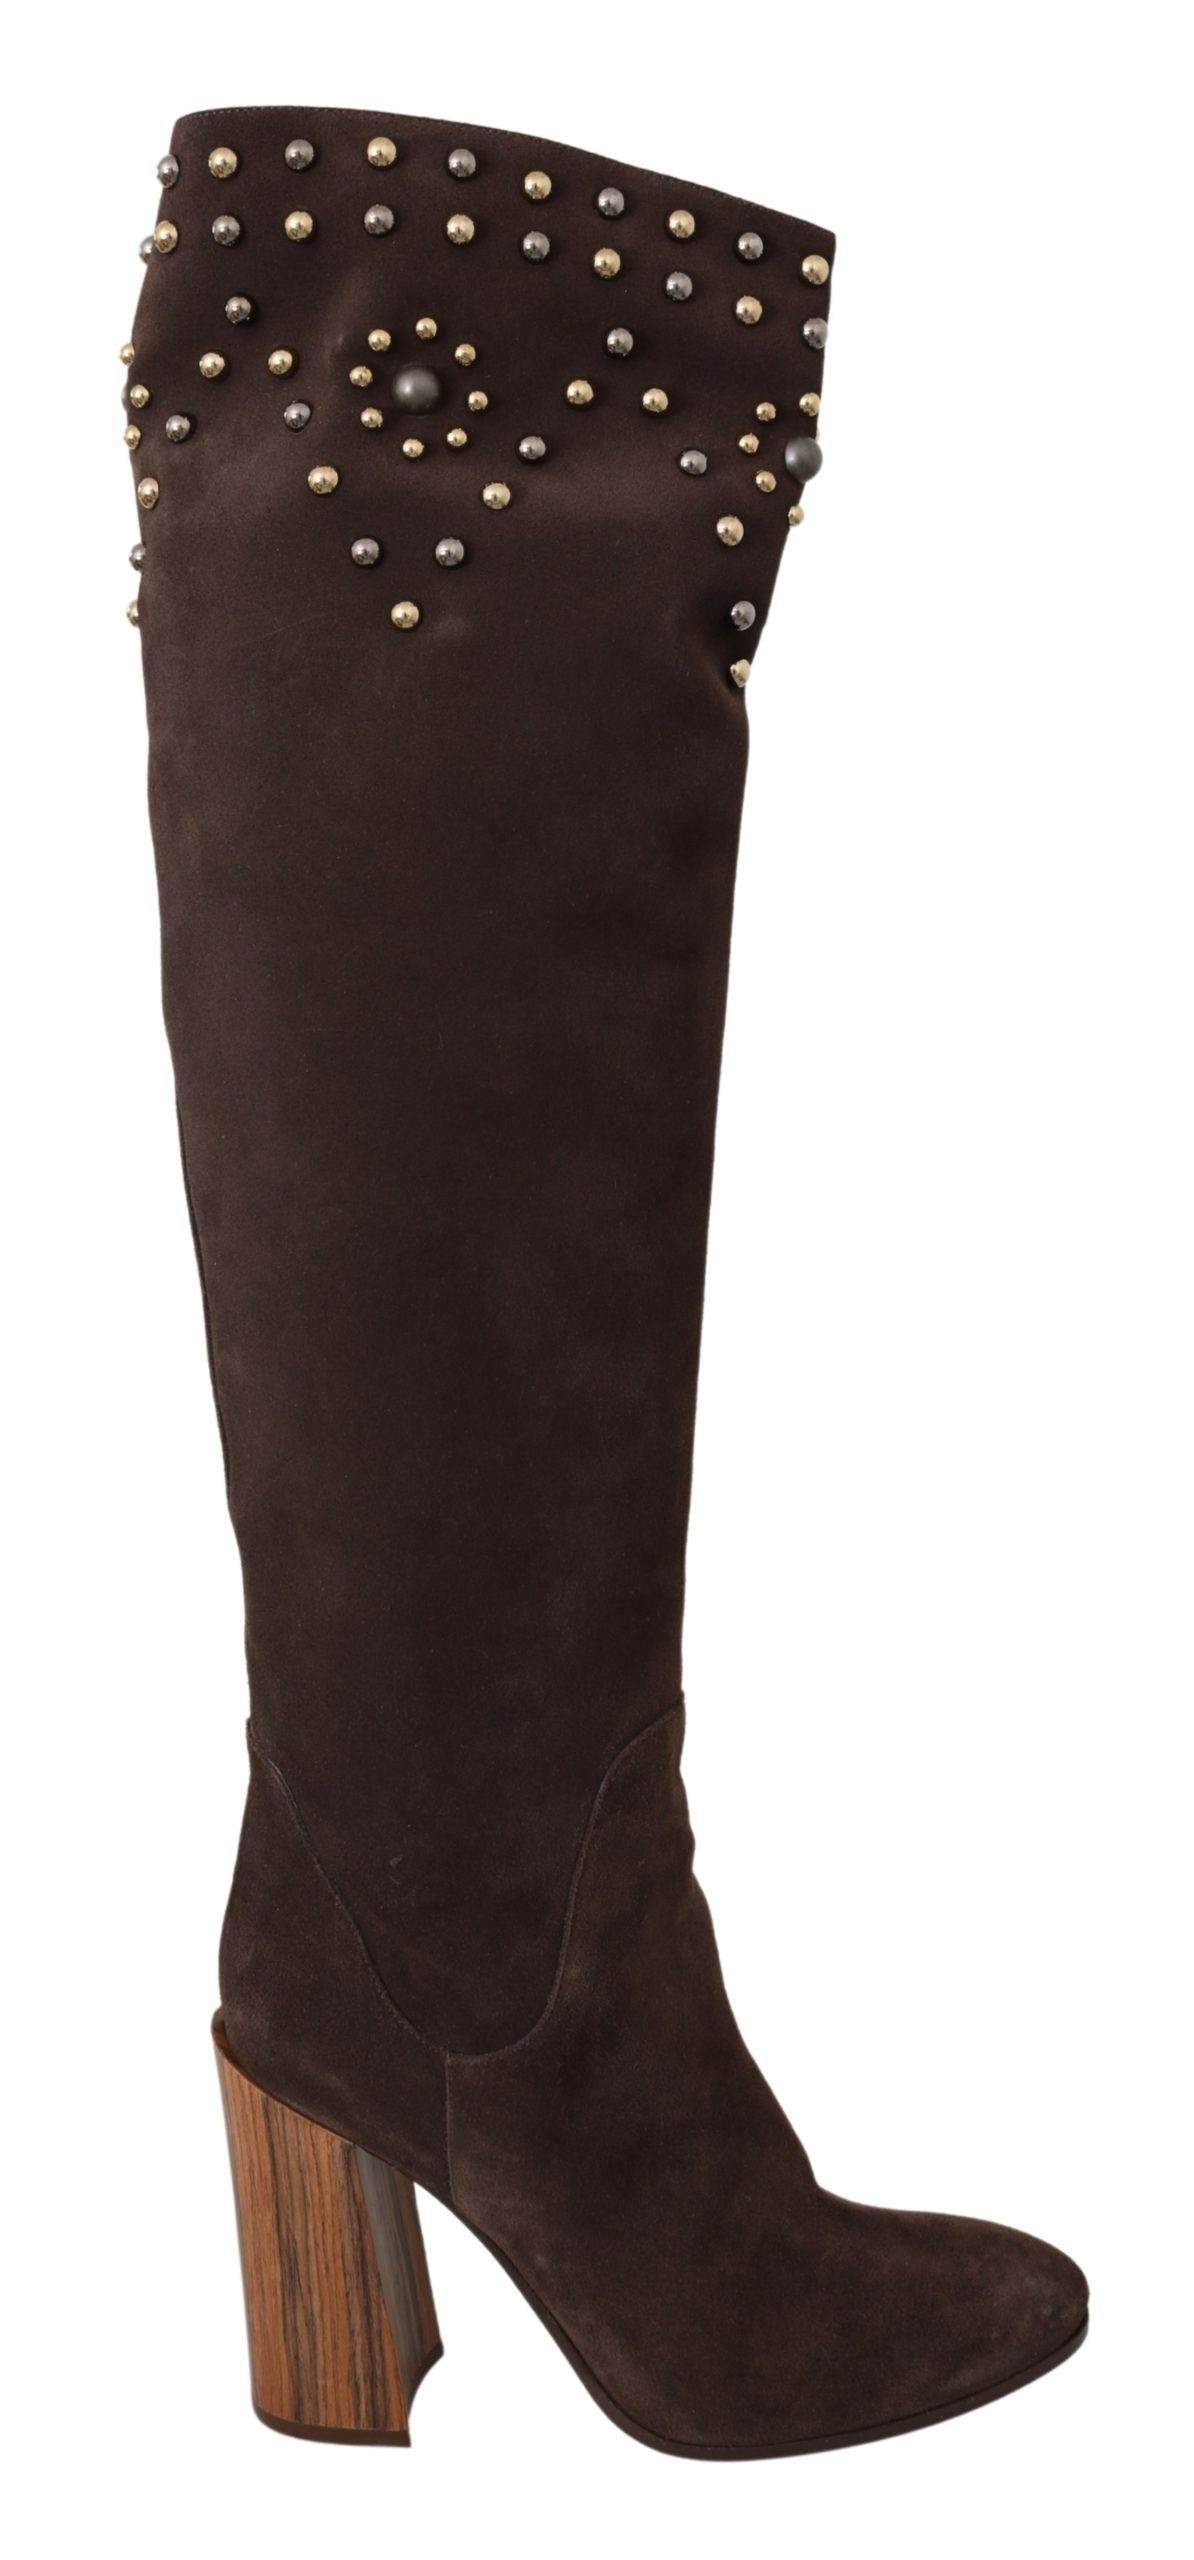 Dolce & Gabbana  Brown Suede Studded Knee High Shoes Boots #women, Boots - Women - Shoes, Brand_Dolce & Gabbana, Brown, Catch, Category_Shoes, Dolce & Gabbana, EU39/US8.5, feed-agegroup-adult, feed-color-brown, feed-gender-female, feed-size-US8.5, Gender_Women, Kogan, Shoes - New Arrivals at SEYMAYKA